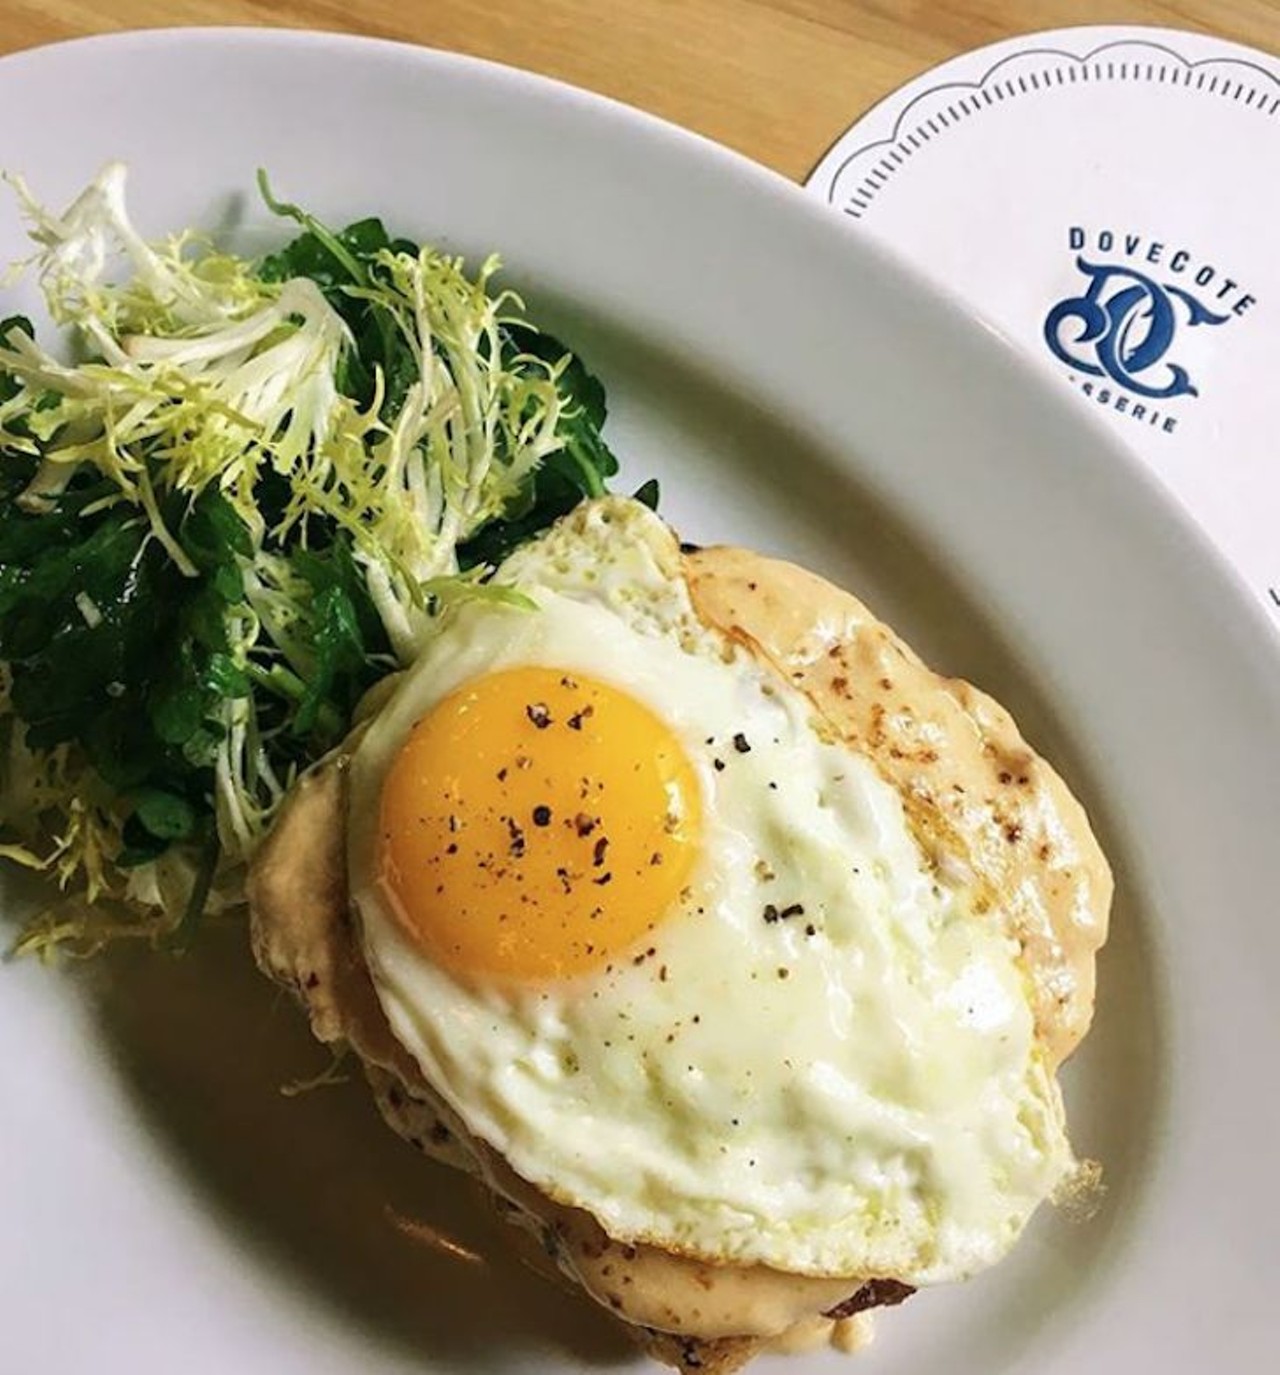 DoveCote 
390 N. Orange Ave., 407-930-1700
Serving brunch every Saturday and Sunday, downtown&#146;s DoveCote is fancy-but-comfy French-inspired brasserie. Whether it&#146;s chicken liver p&acirc;t&eacute;, salade lyonnaise or crab-and-Gruyere quiche, you&#146;re sure to be transported into un daydream fran&ccedil;aise.
Photo via DoveCote/Instagram